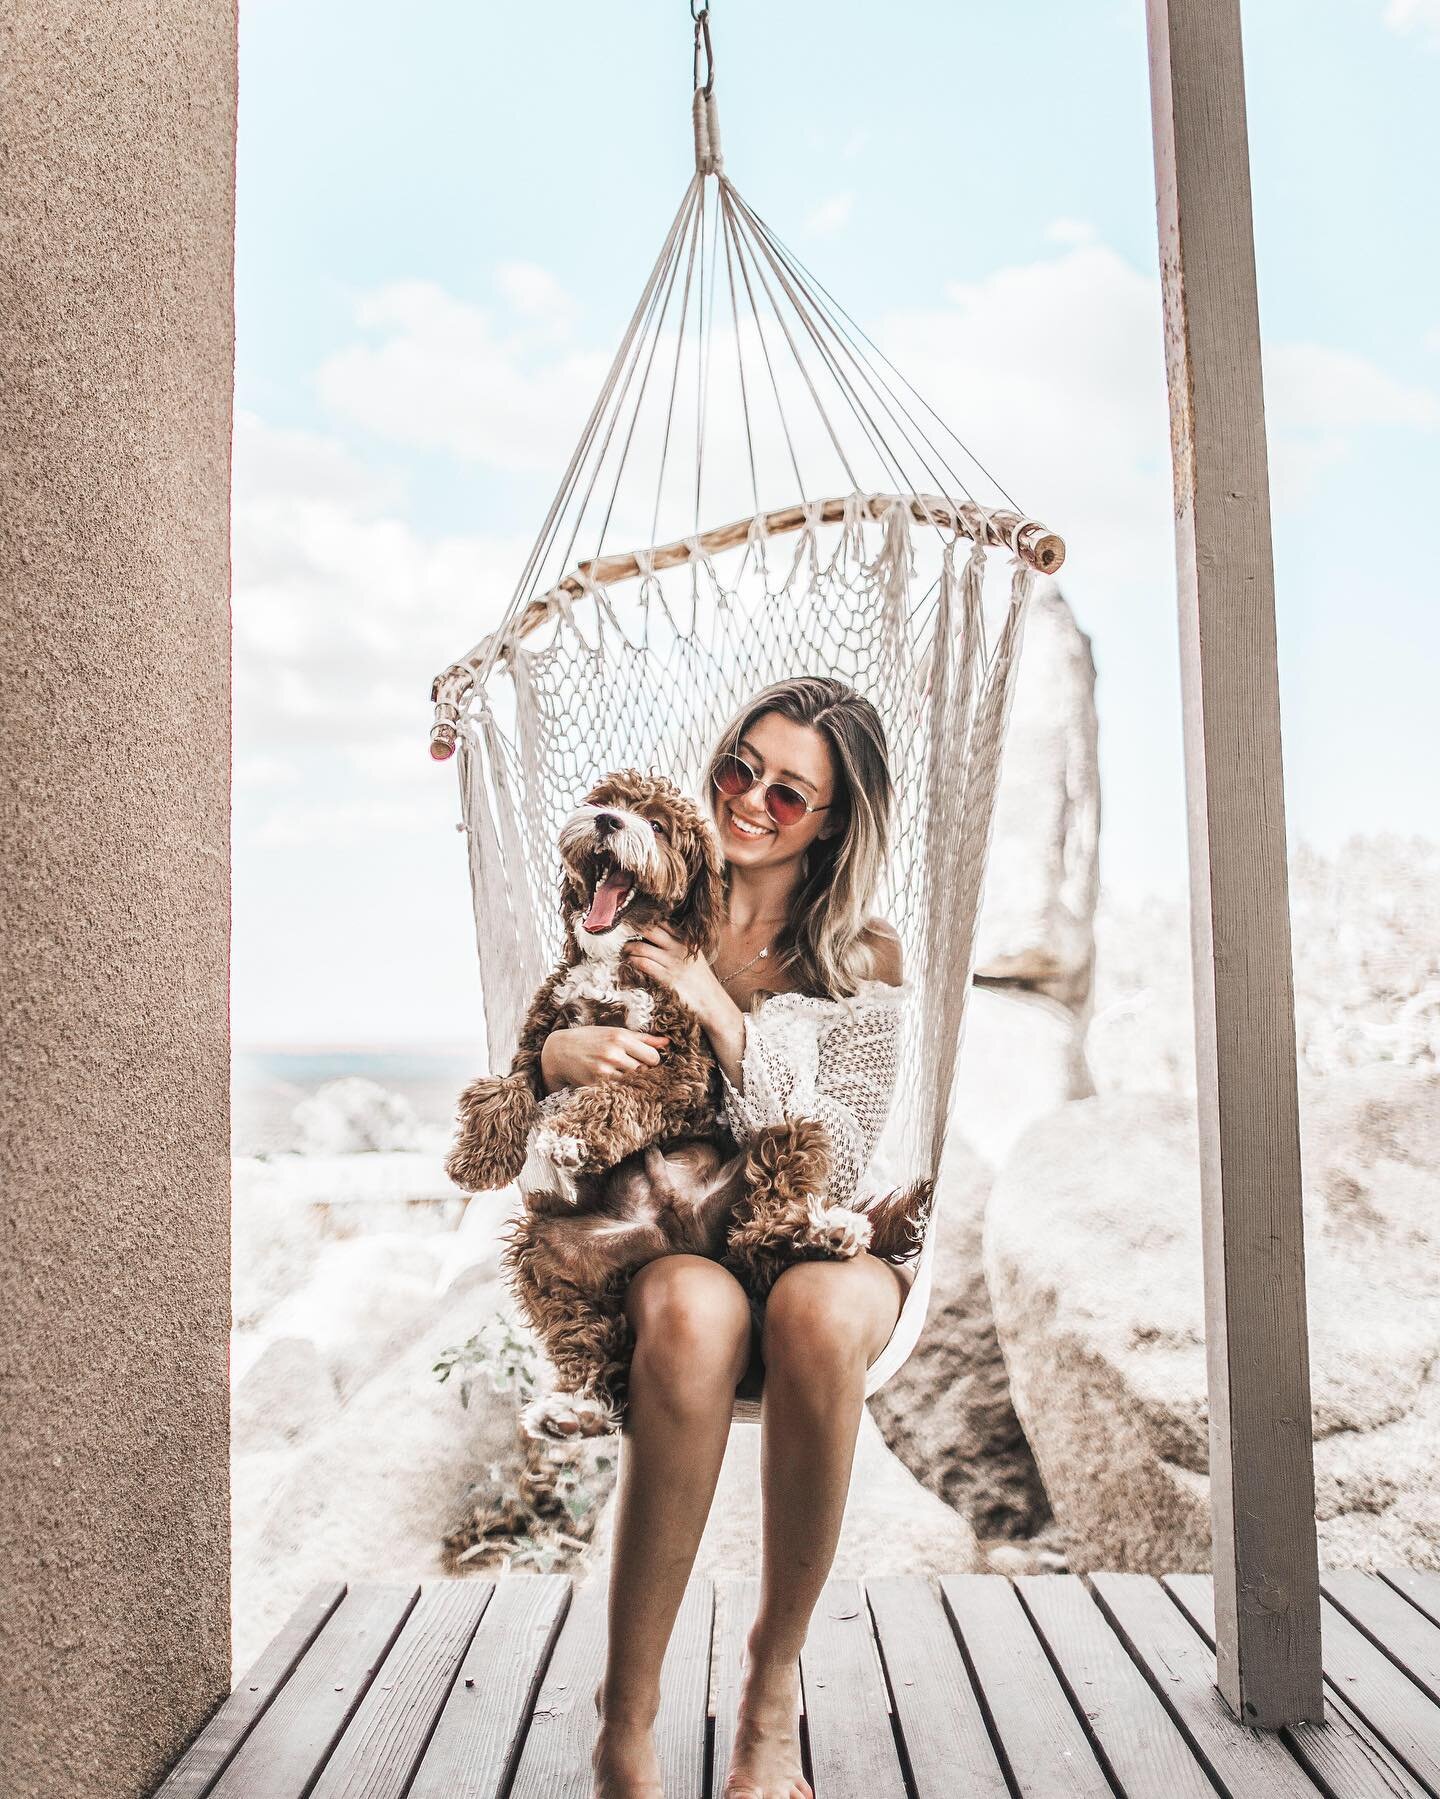 Relax with your bestie 🐶

Get Clean White presets from @mobilelightroompresets profile bio!
__________________________________
#mobilelightroompresets #BlvckMediaPresets #loov #loovpresets #PresetKauppa #lightroompresets #lightroomfilters #mobilelig